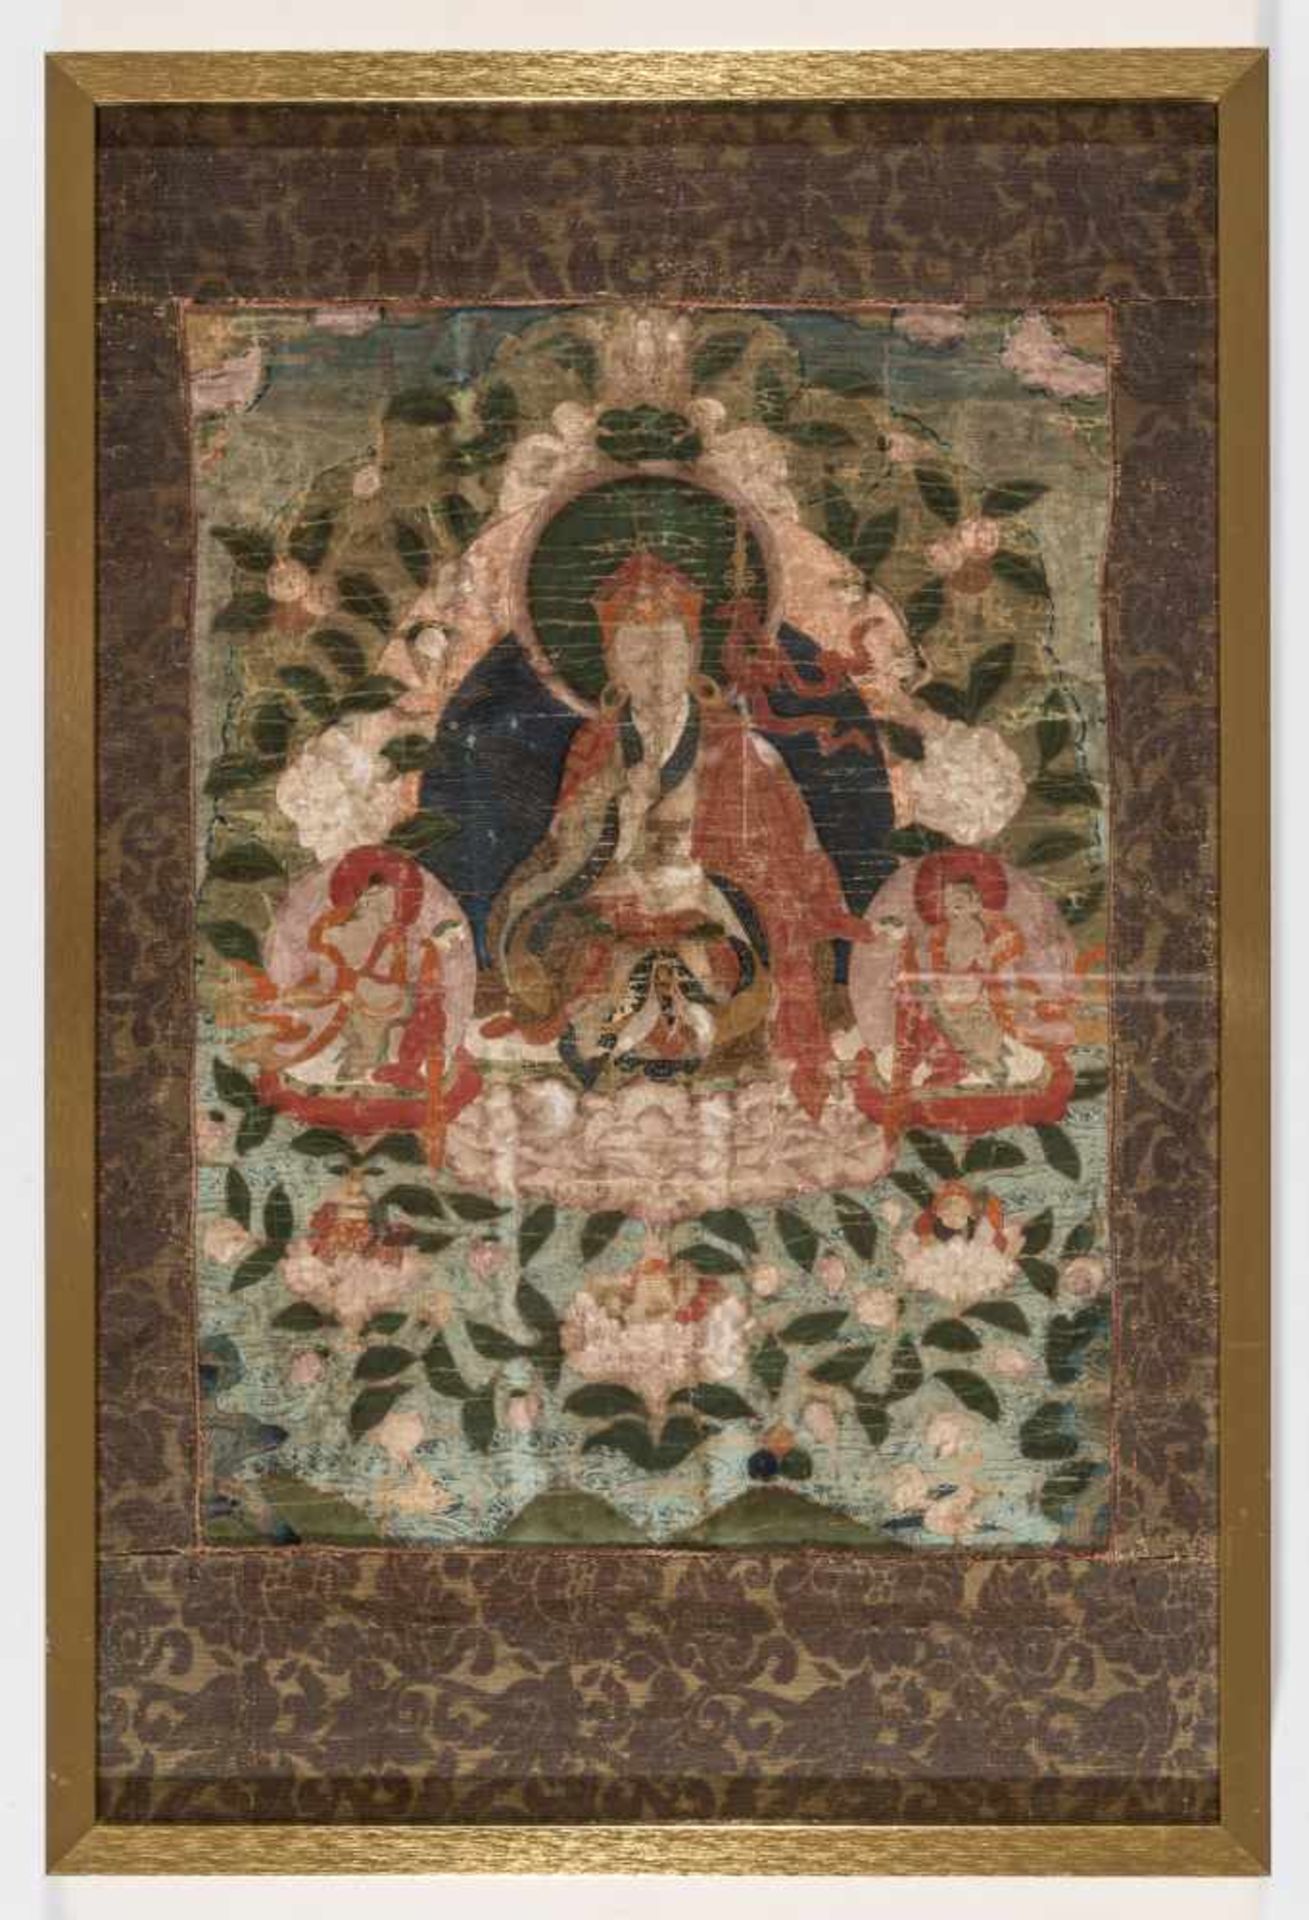 AN 18th CENTURY THANGKA OF GURU RINPOCHE IN ZANGDOK PALRIDistemper and gold paint on cloth, framed - Image 10 of 11